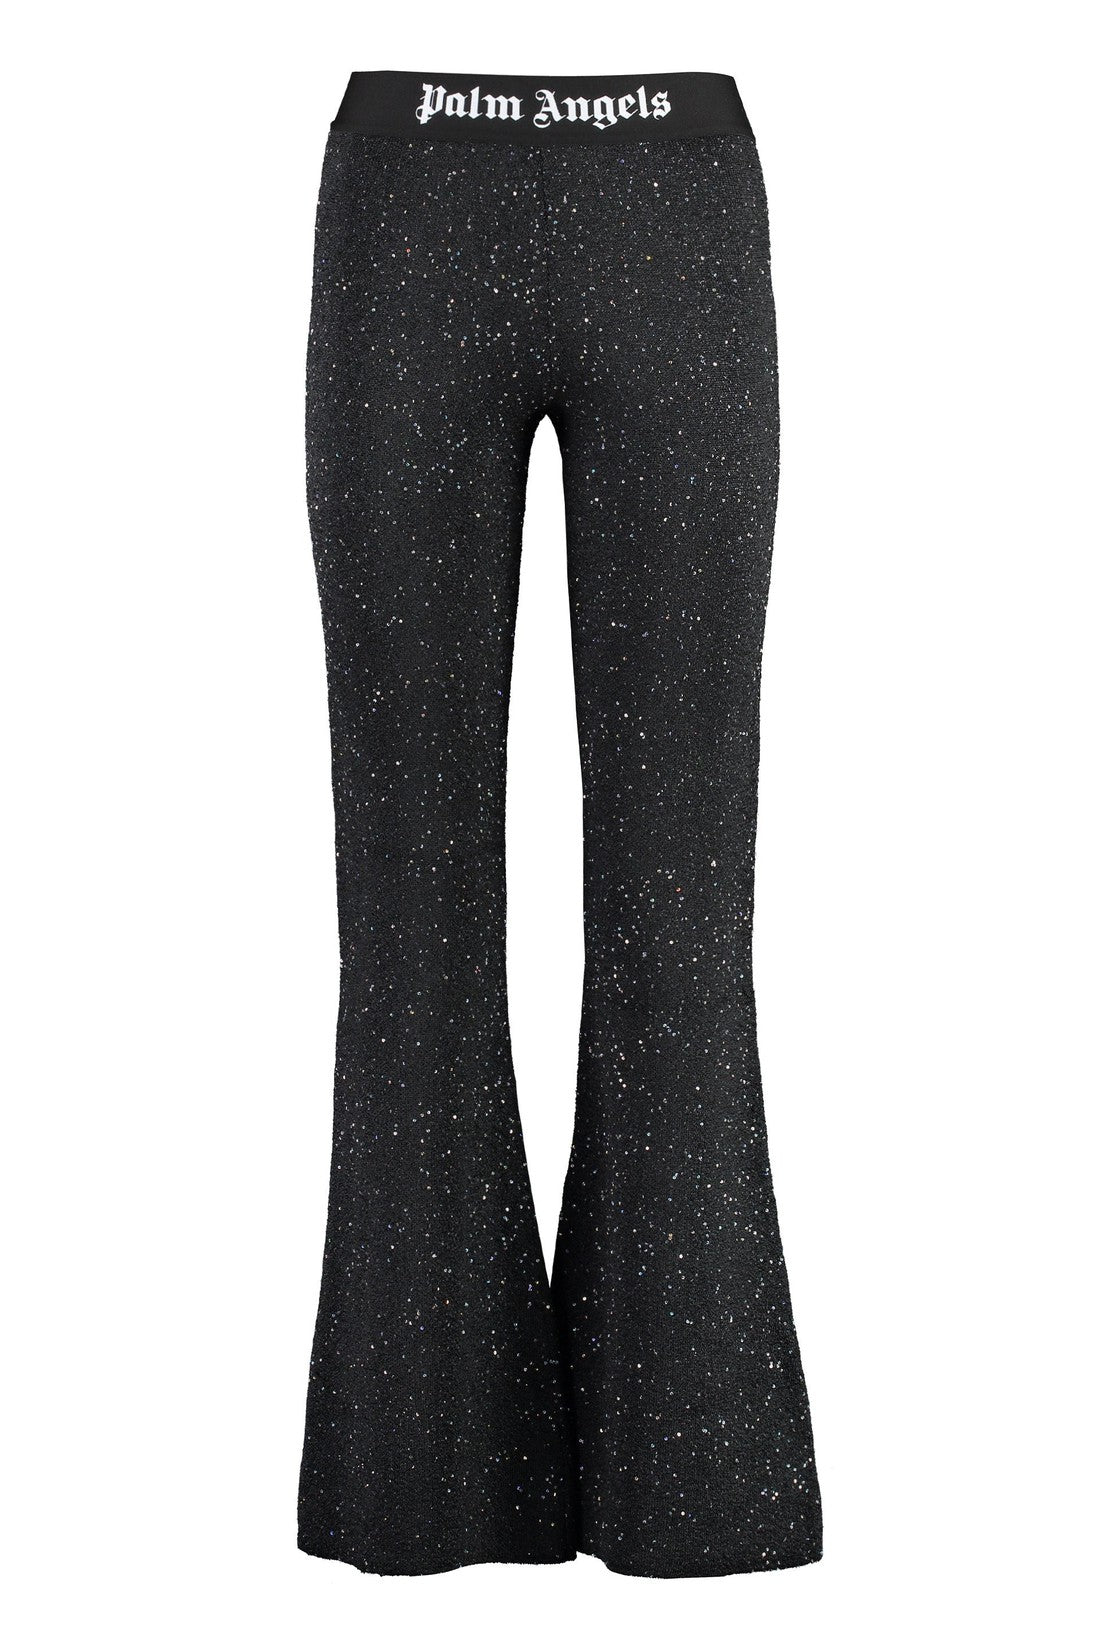 Palm Angels-OUTLET-SALE-Knitted trousers-ARCHIVIST